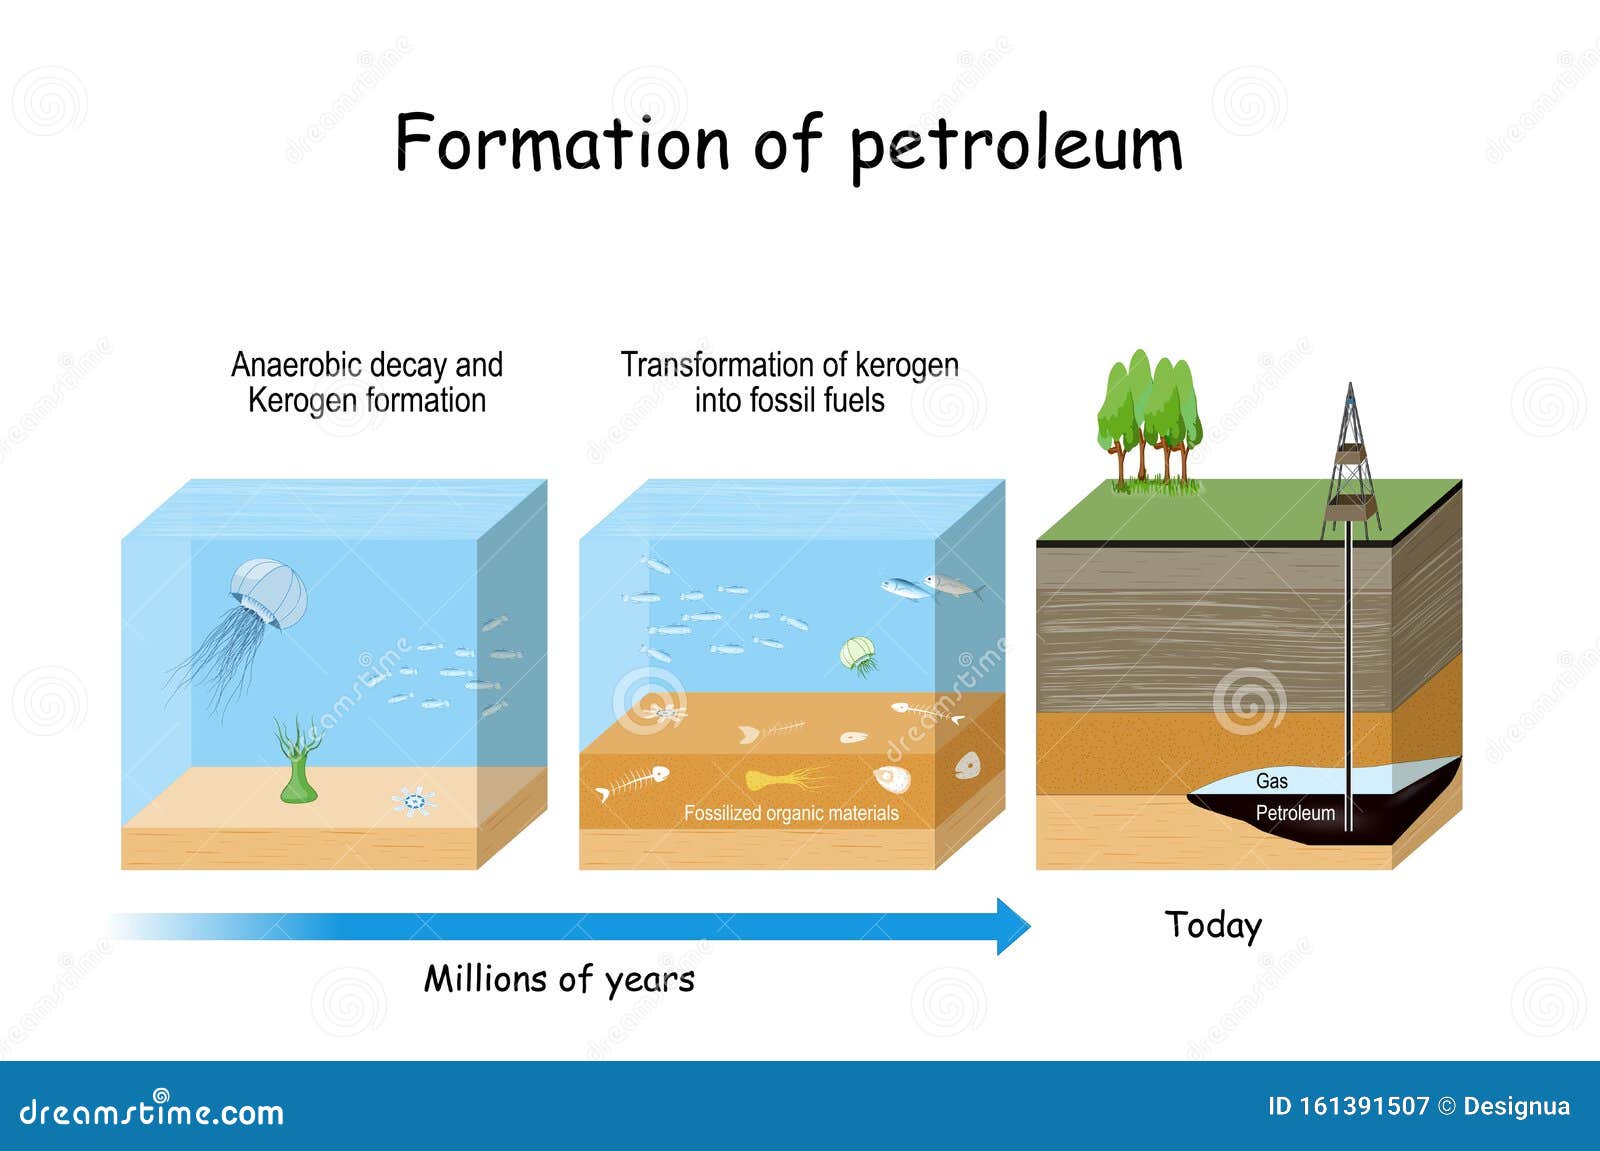 formation of petroleum. oil and gas formation